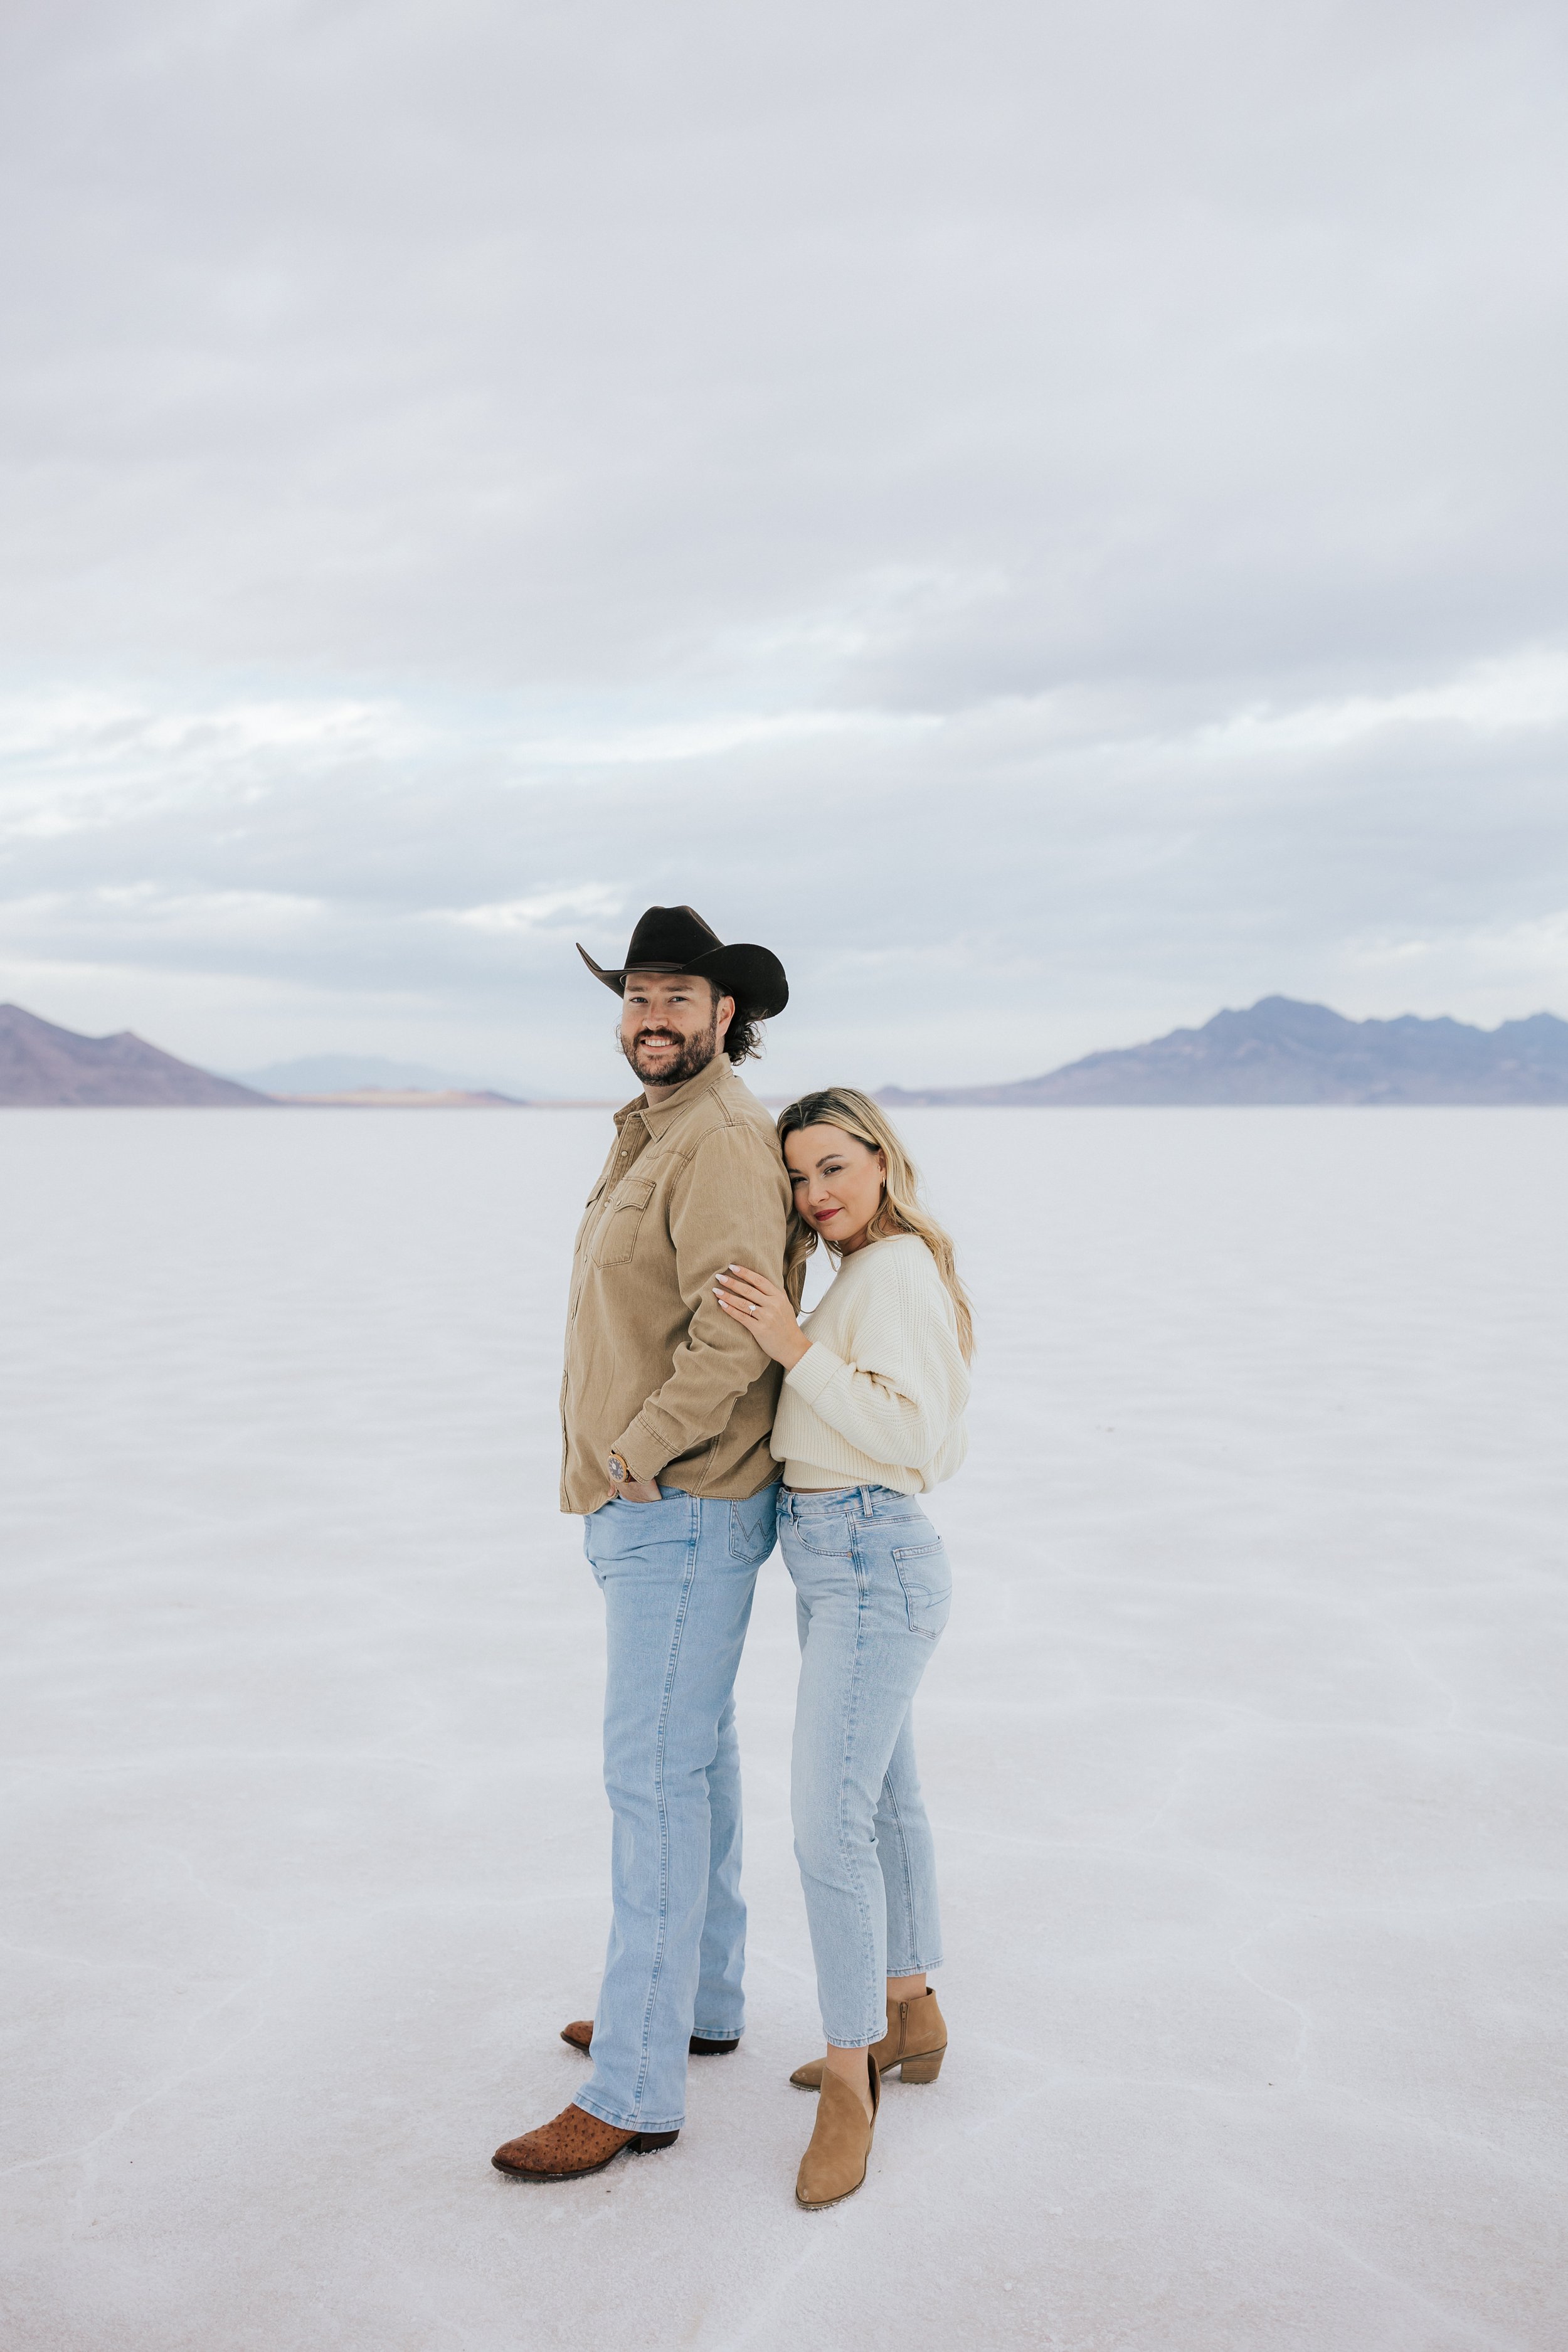  An engaged couple poses for a photo at the Bonneville Salt Flats near Wendover, Nevada and Salt Lake City, Utah. The Salt Flats are white and the sky is overcast. The mountains show behind. Engagement session at the Utah Salt Flats. Salt Flats photo